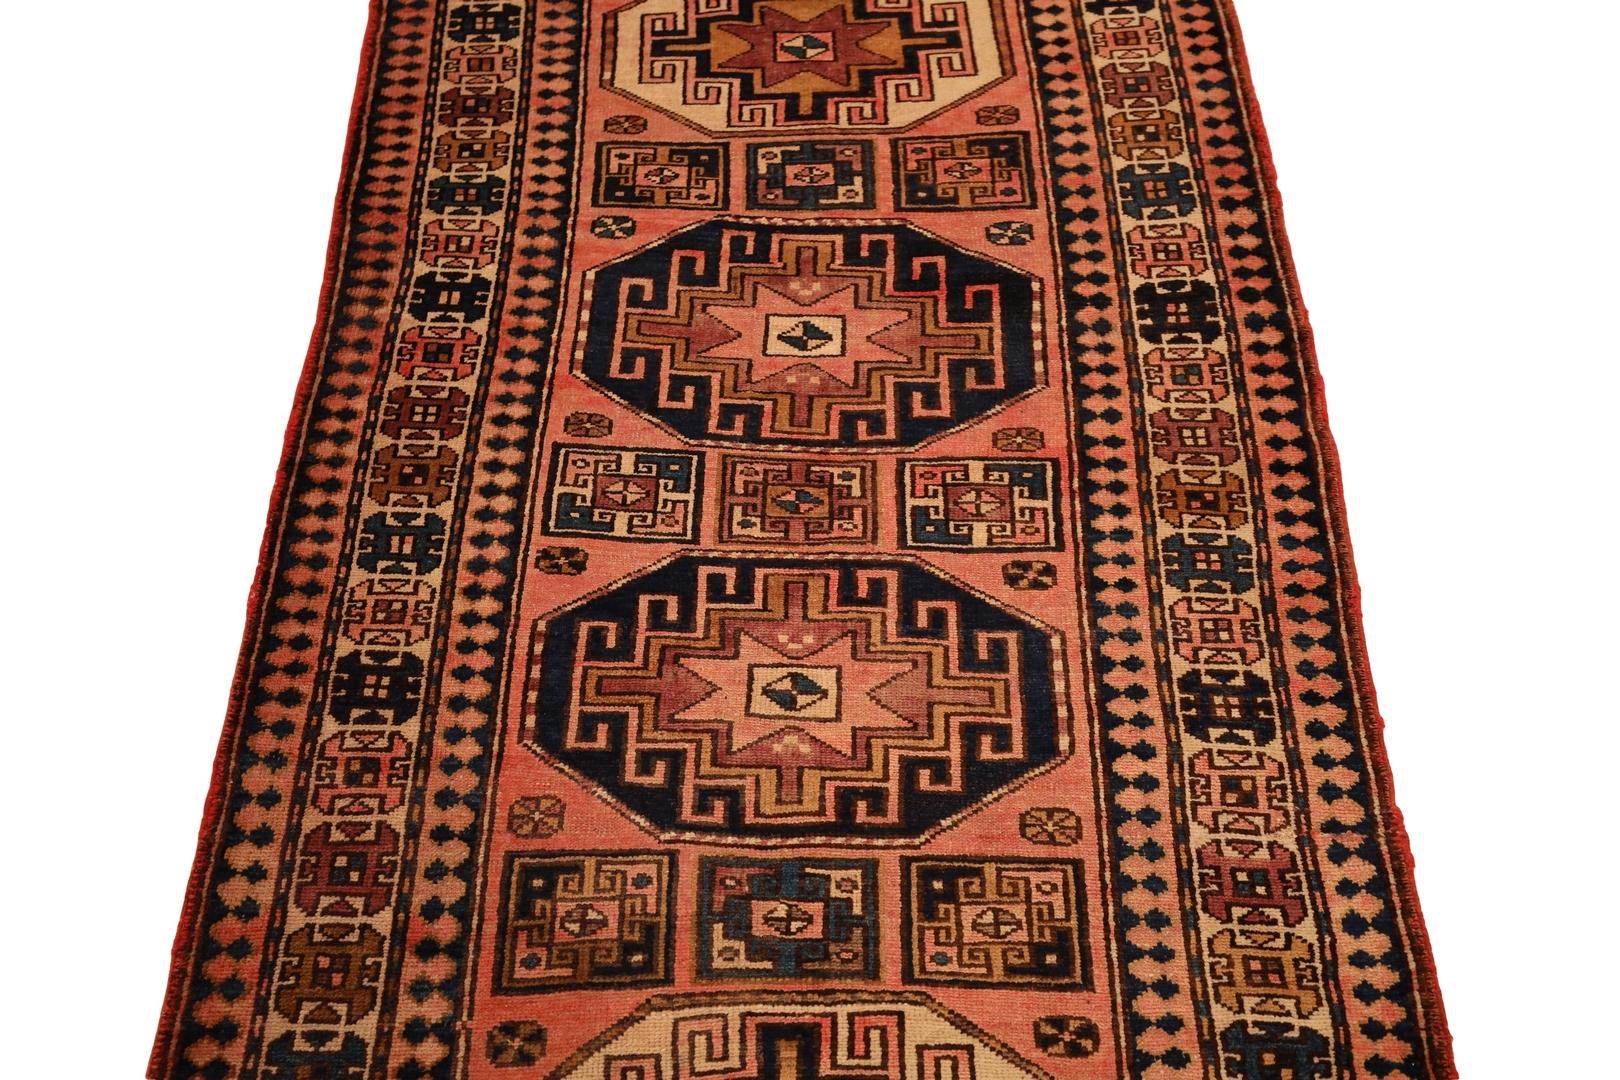 Hand-Knotted North-West Persian Semi-Antique Runner - 3'5